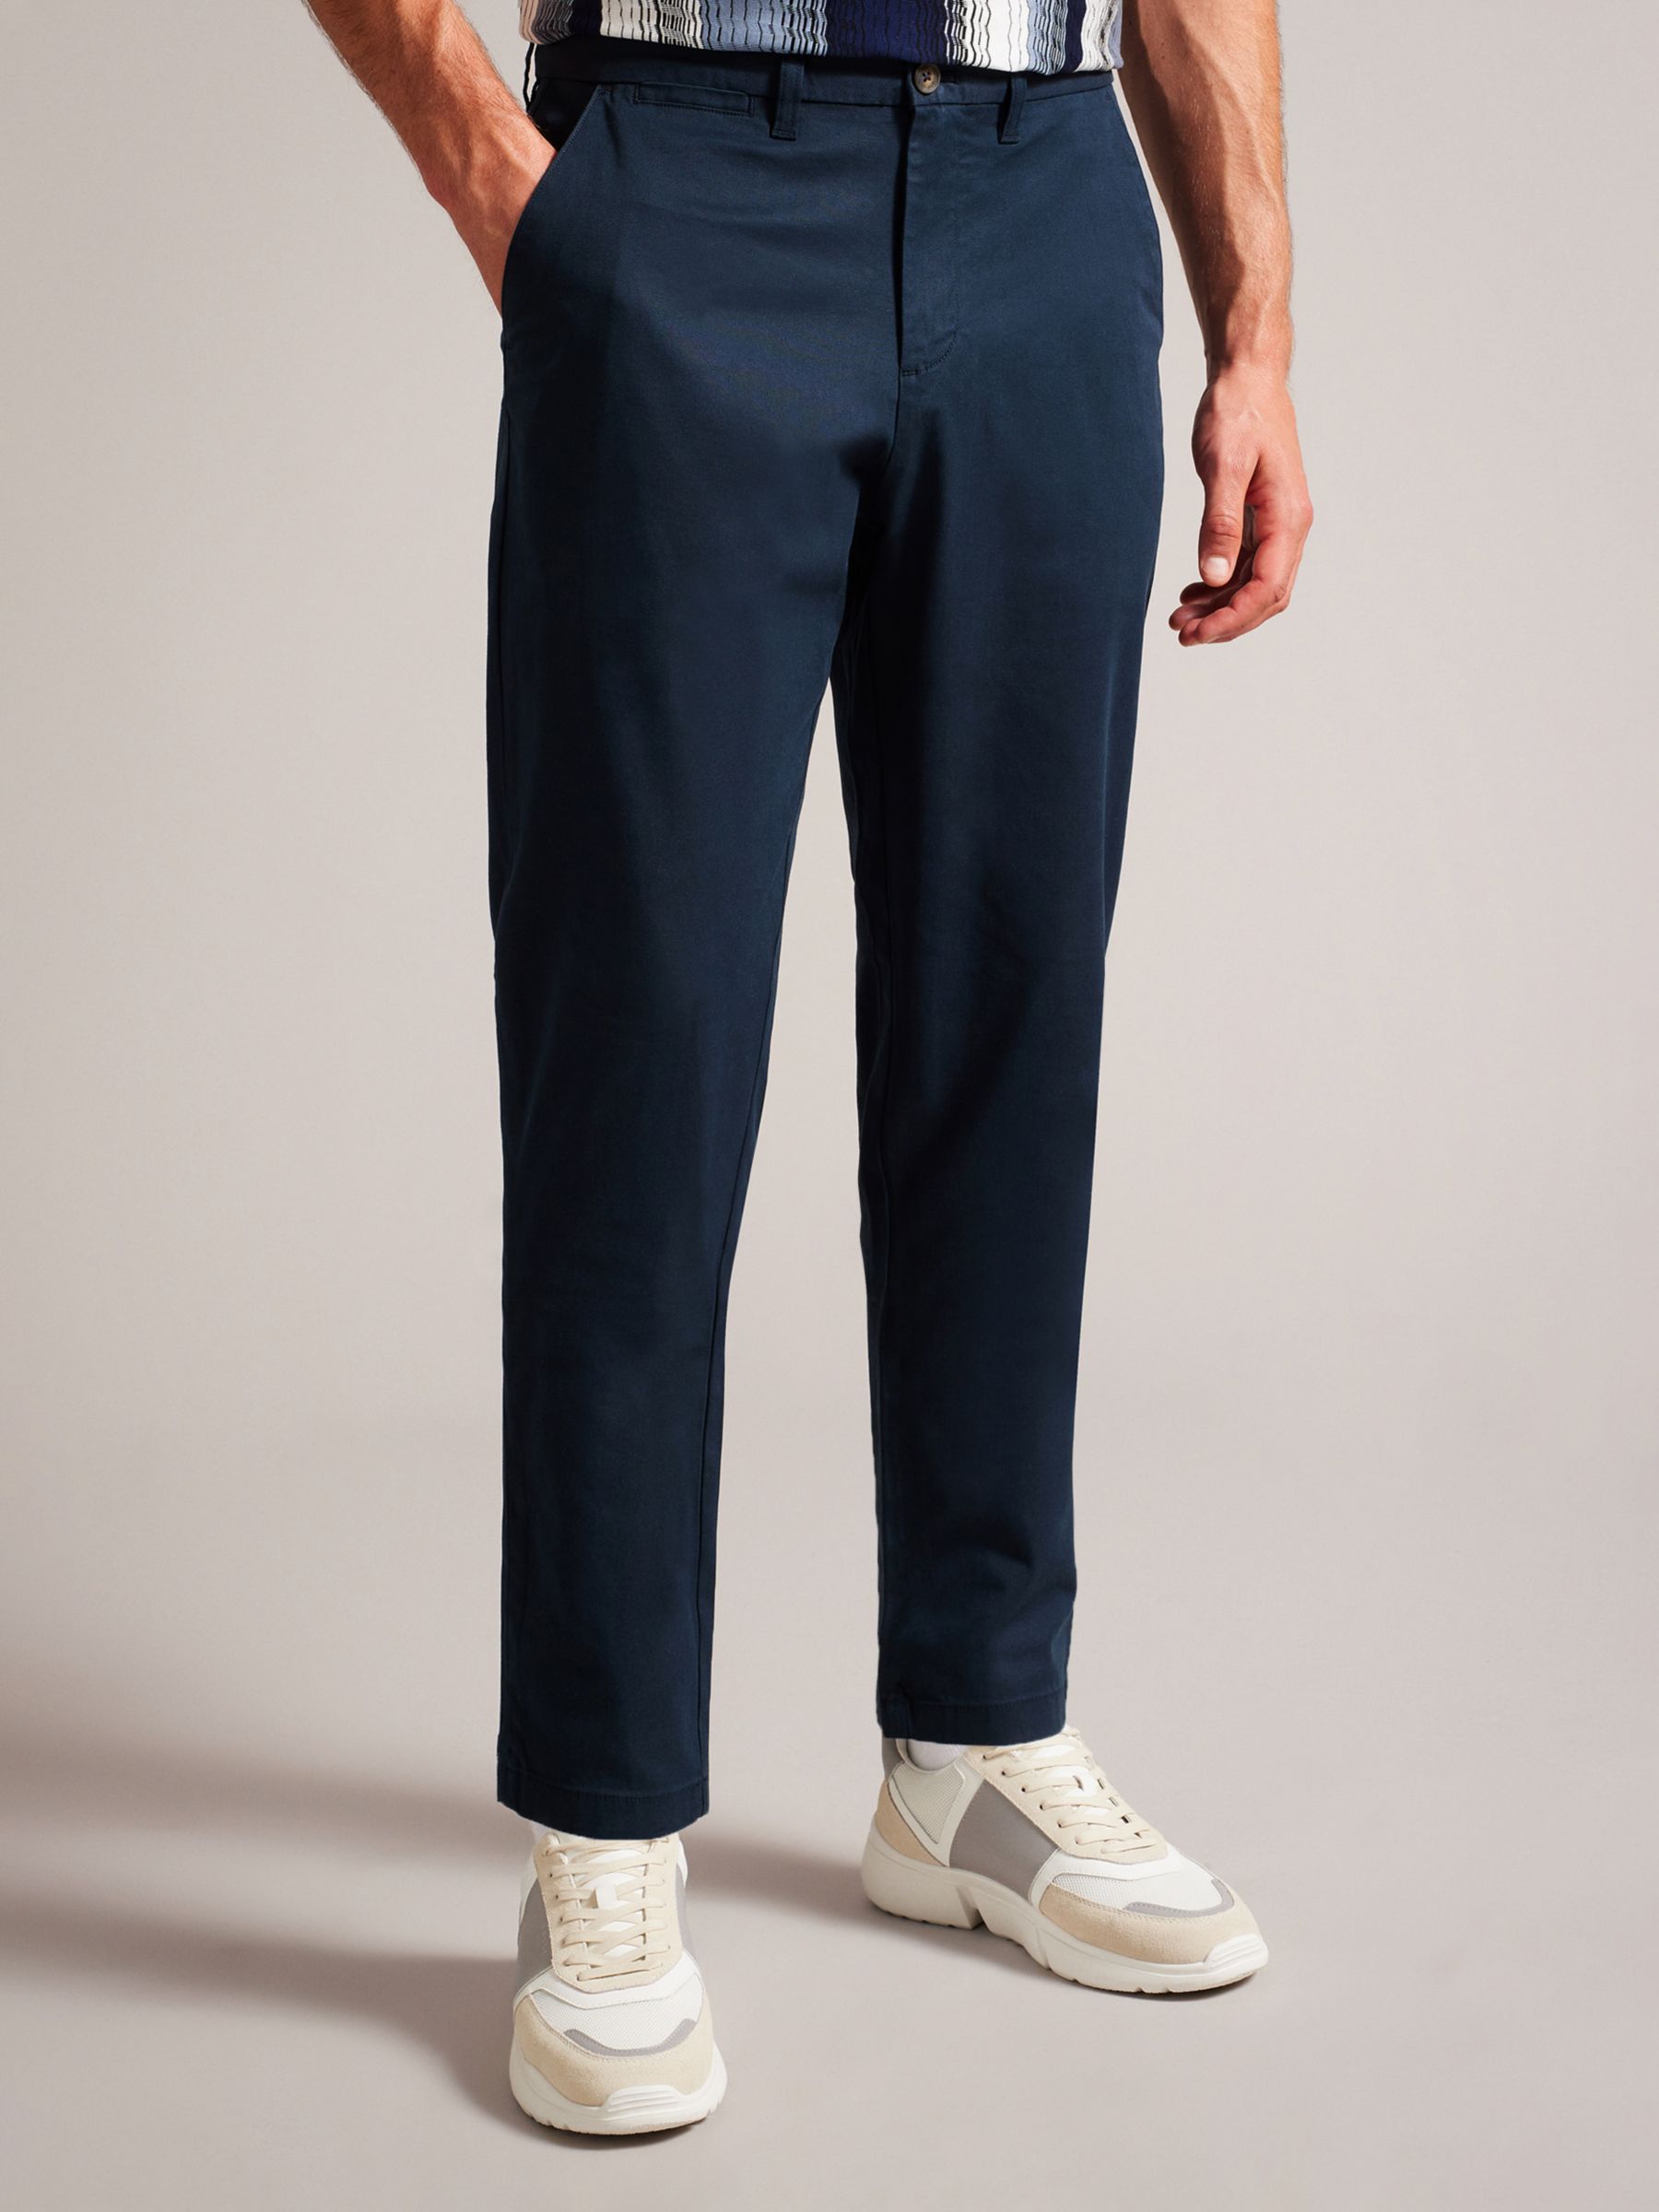 Ted Baker Haybrn Blue Navy Chino Trouser, Navy, 28R